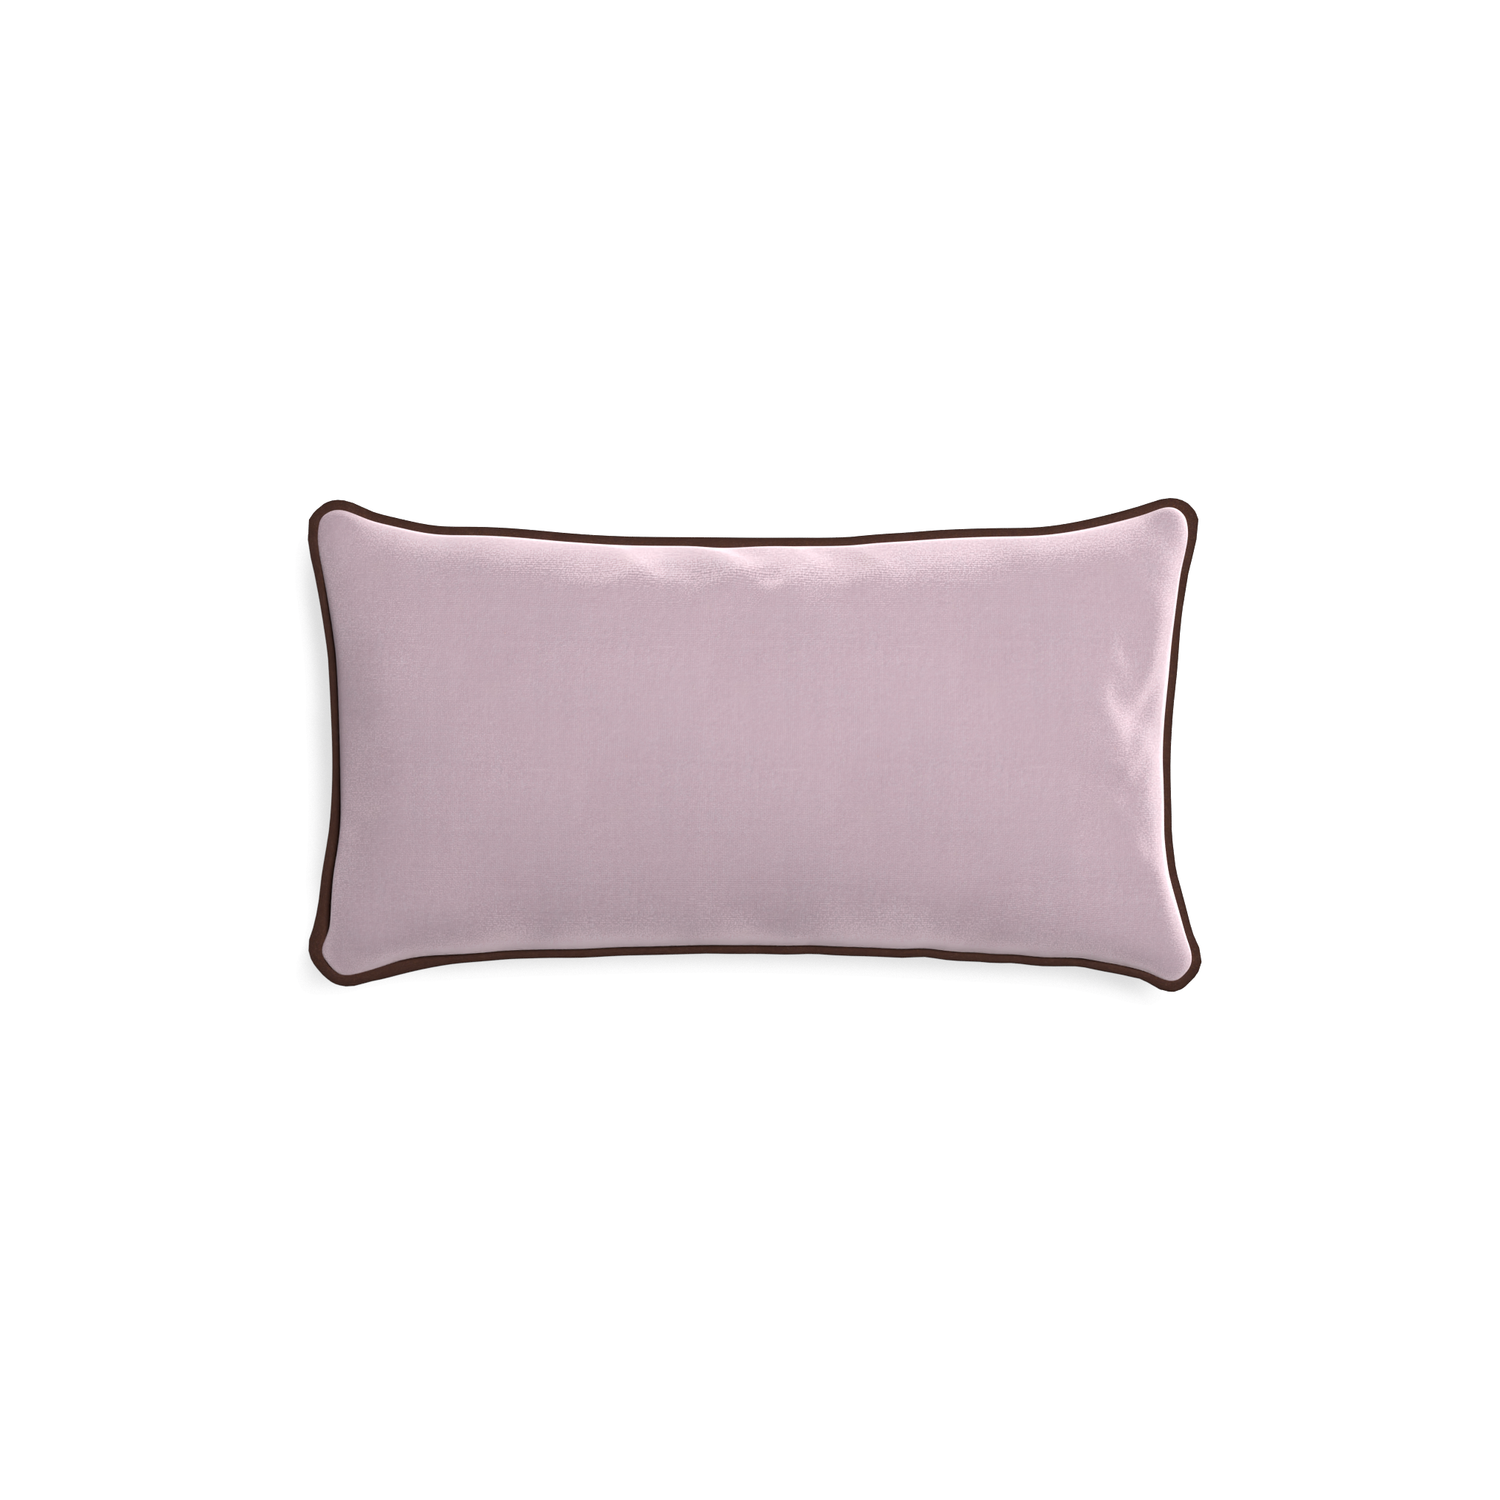 rectangle lilac velvet pillow with brown piping